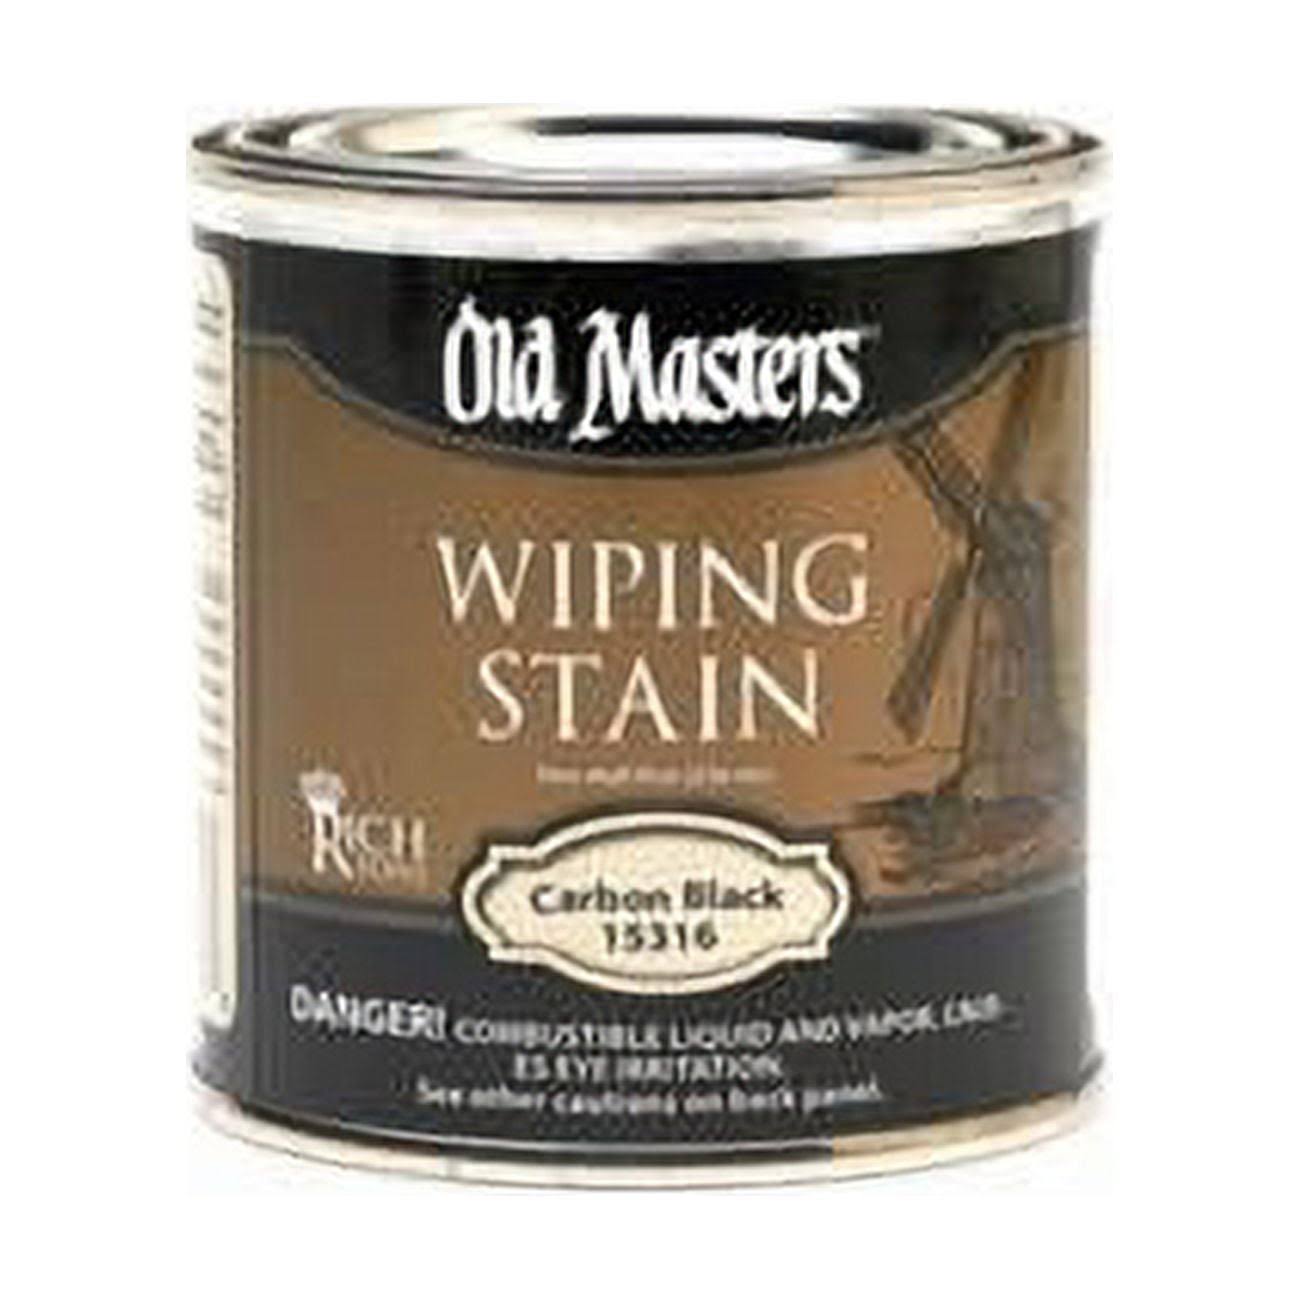 Old Masters Wiping Stain Carbon Black Liquid 0.5 pt 15316